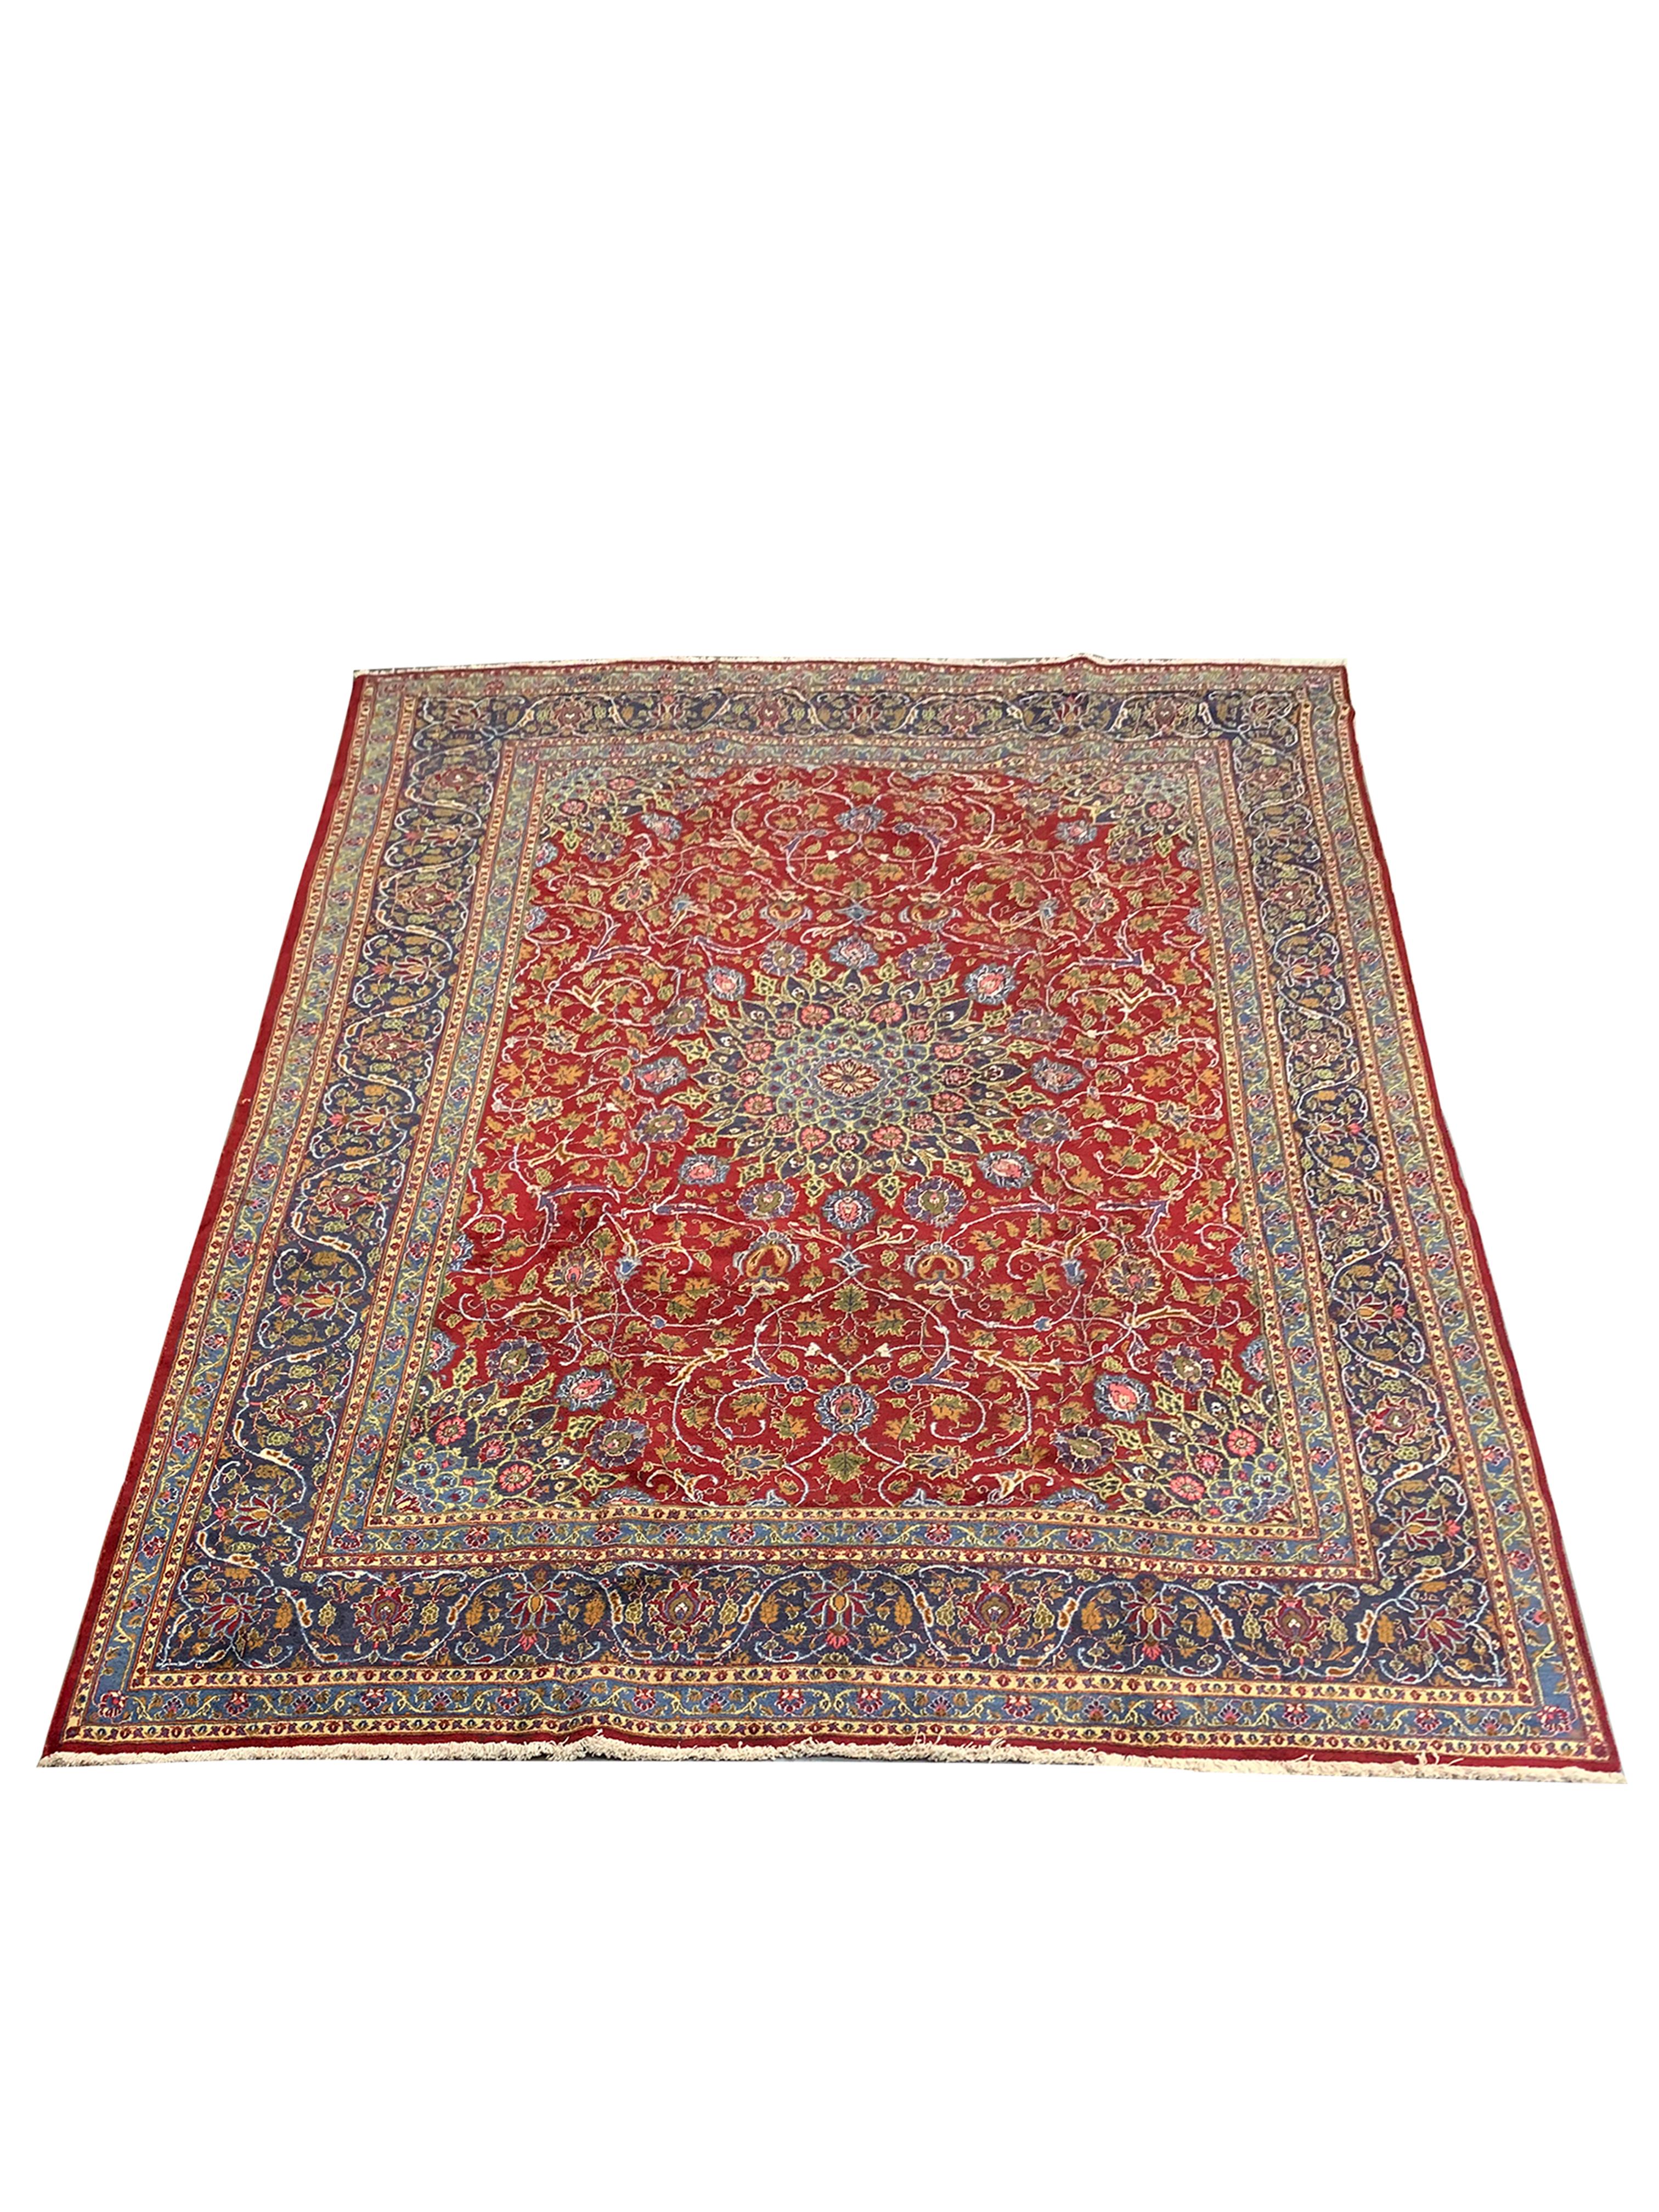 Tribal Traditional Handmade Vintage Red Wool Area Rug Large Oriental Carpet For Sale